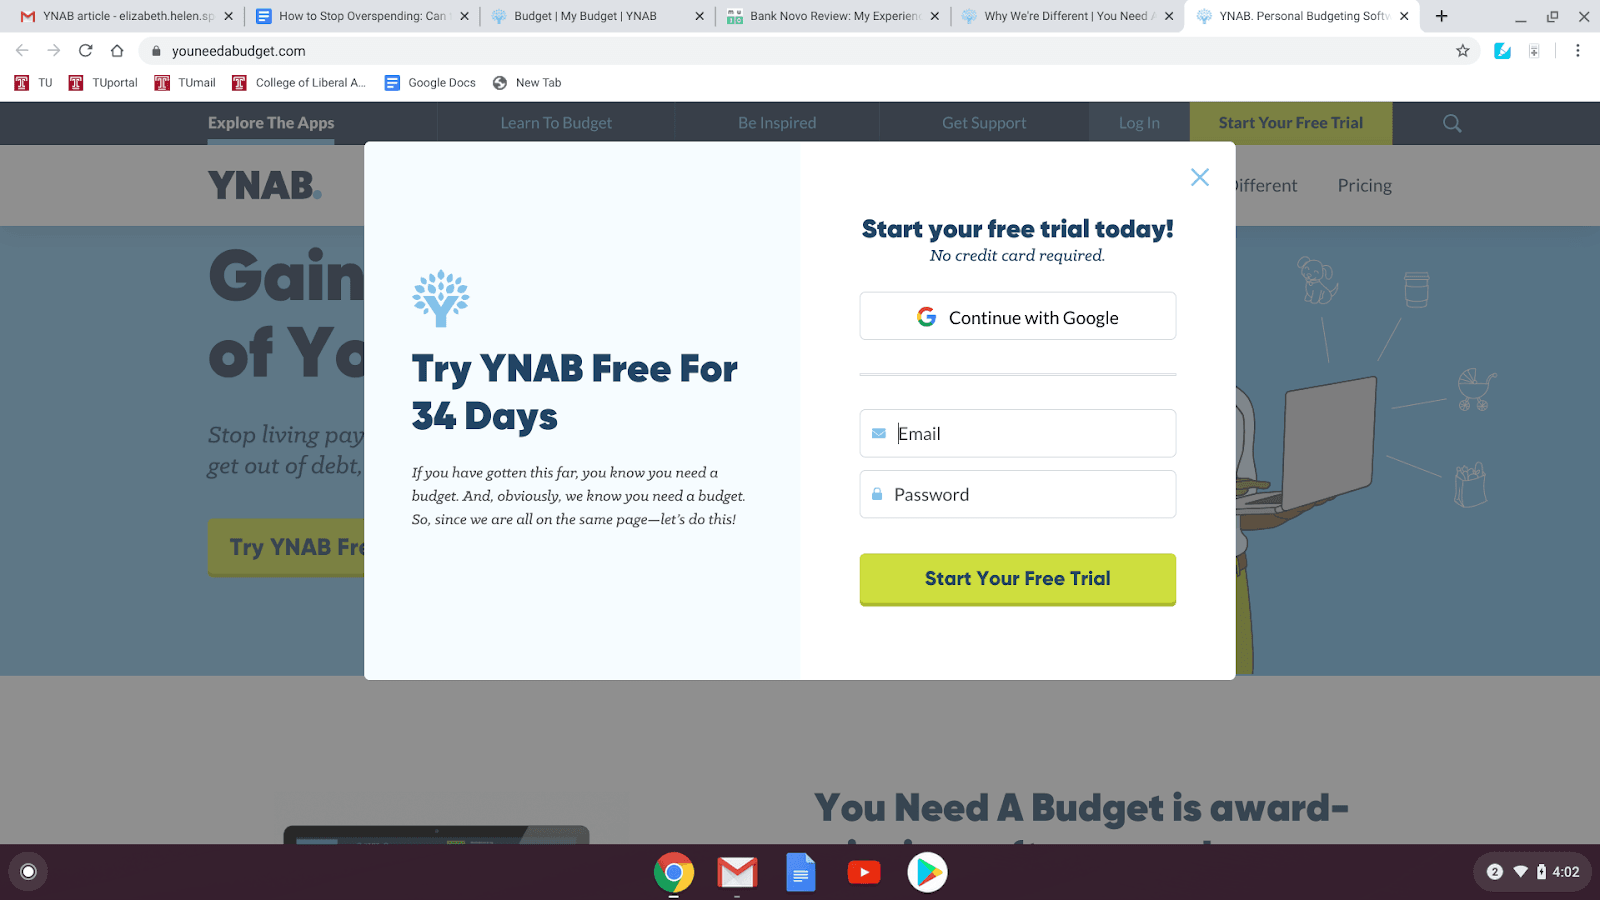 YNAB Review - Sign up